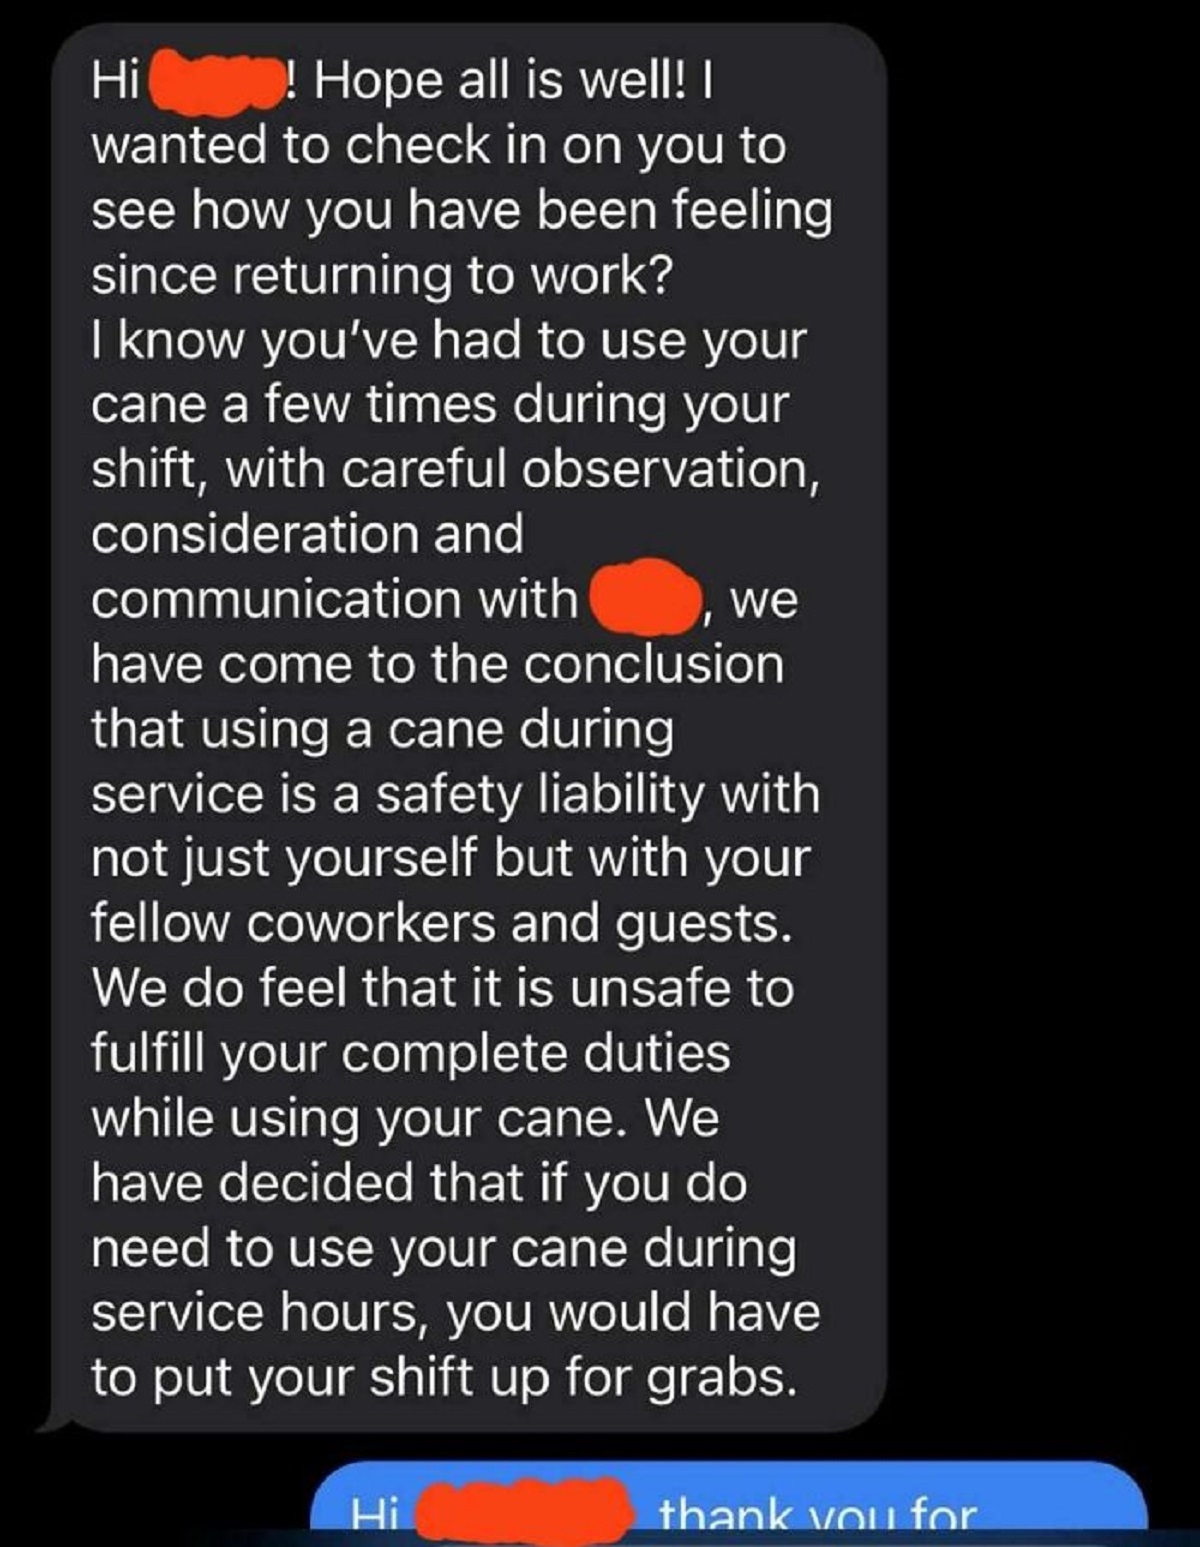 screenshot - Hi Hope all is well! I wanted to check in on you to see how you have been feeling since returning to work? I know you've had to use your cane a few times during your shift, with careful observation, consideration and communication with we hav